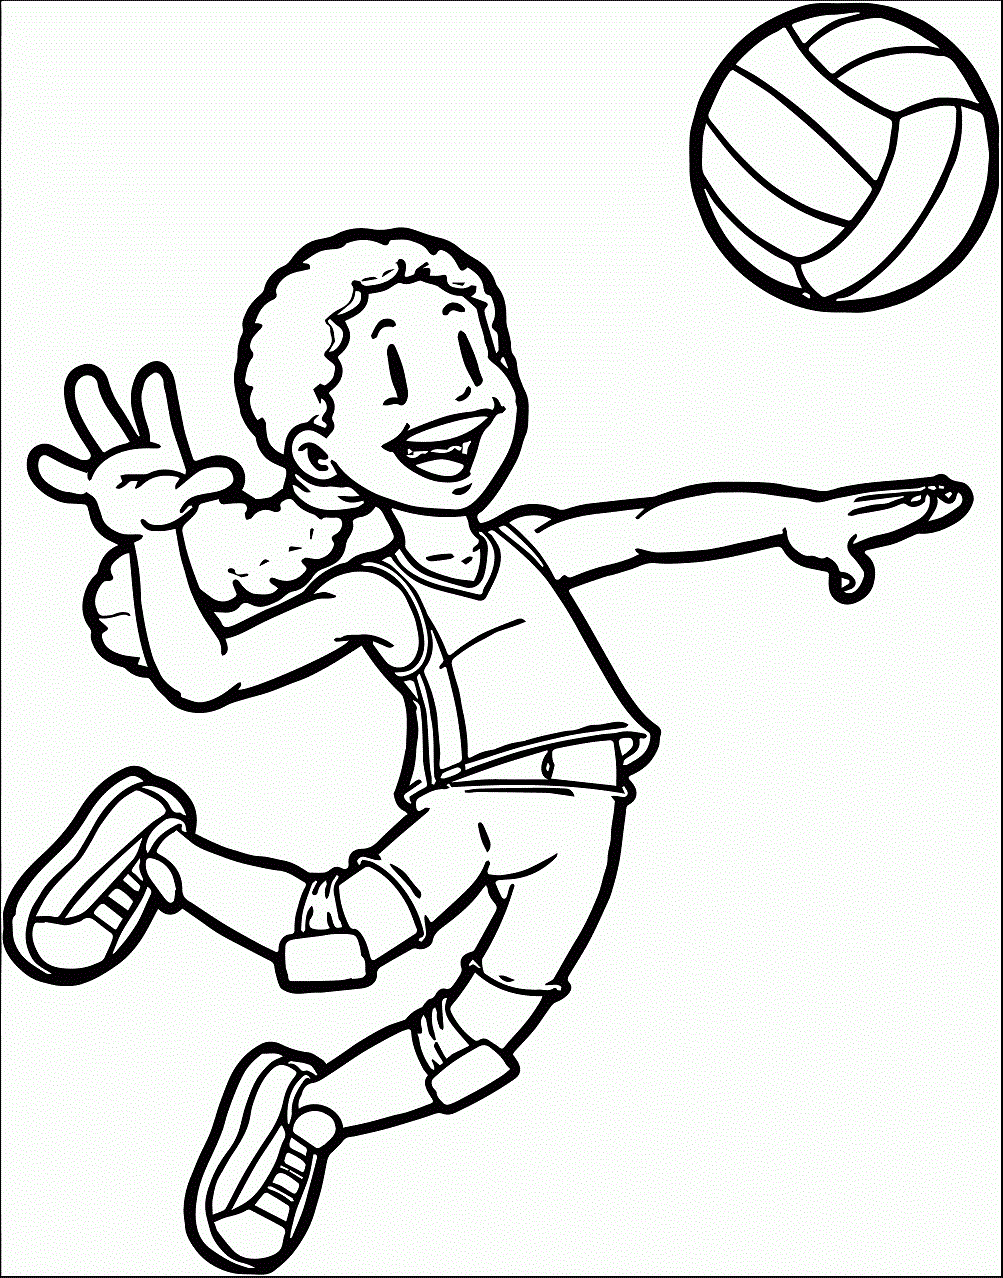 Volleyball Coloring Pages Free Printable Coloring Pages For Kids